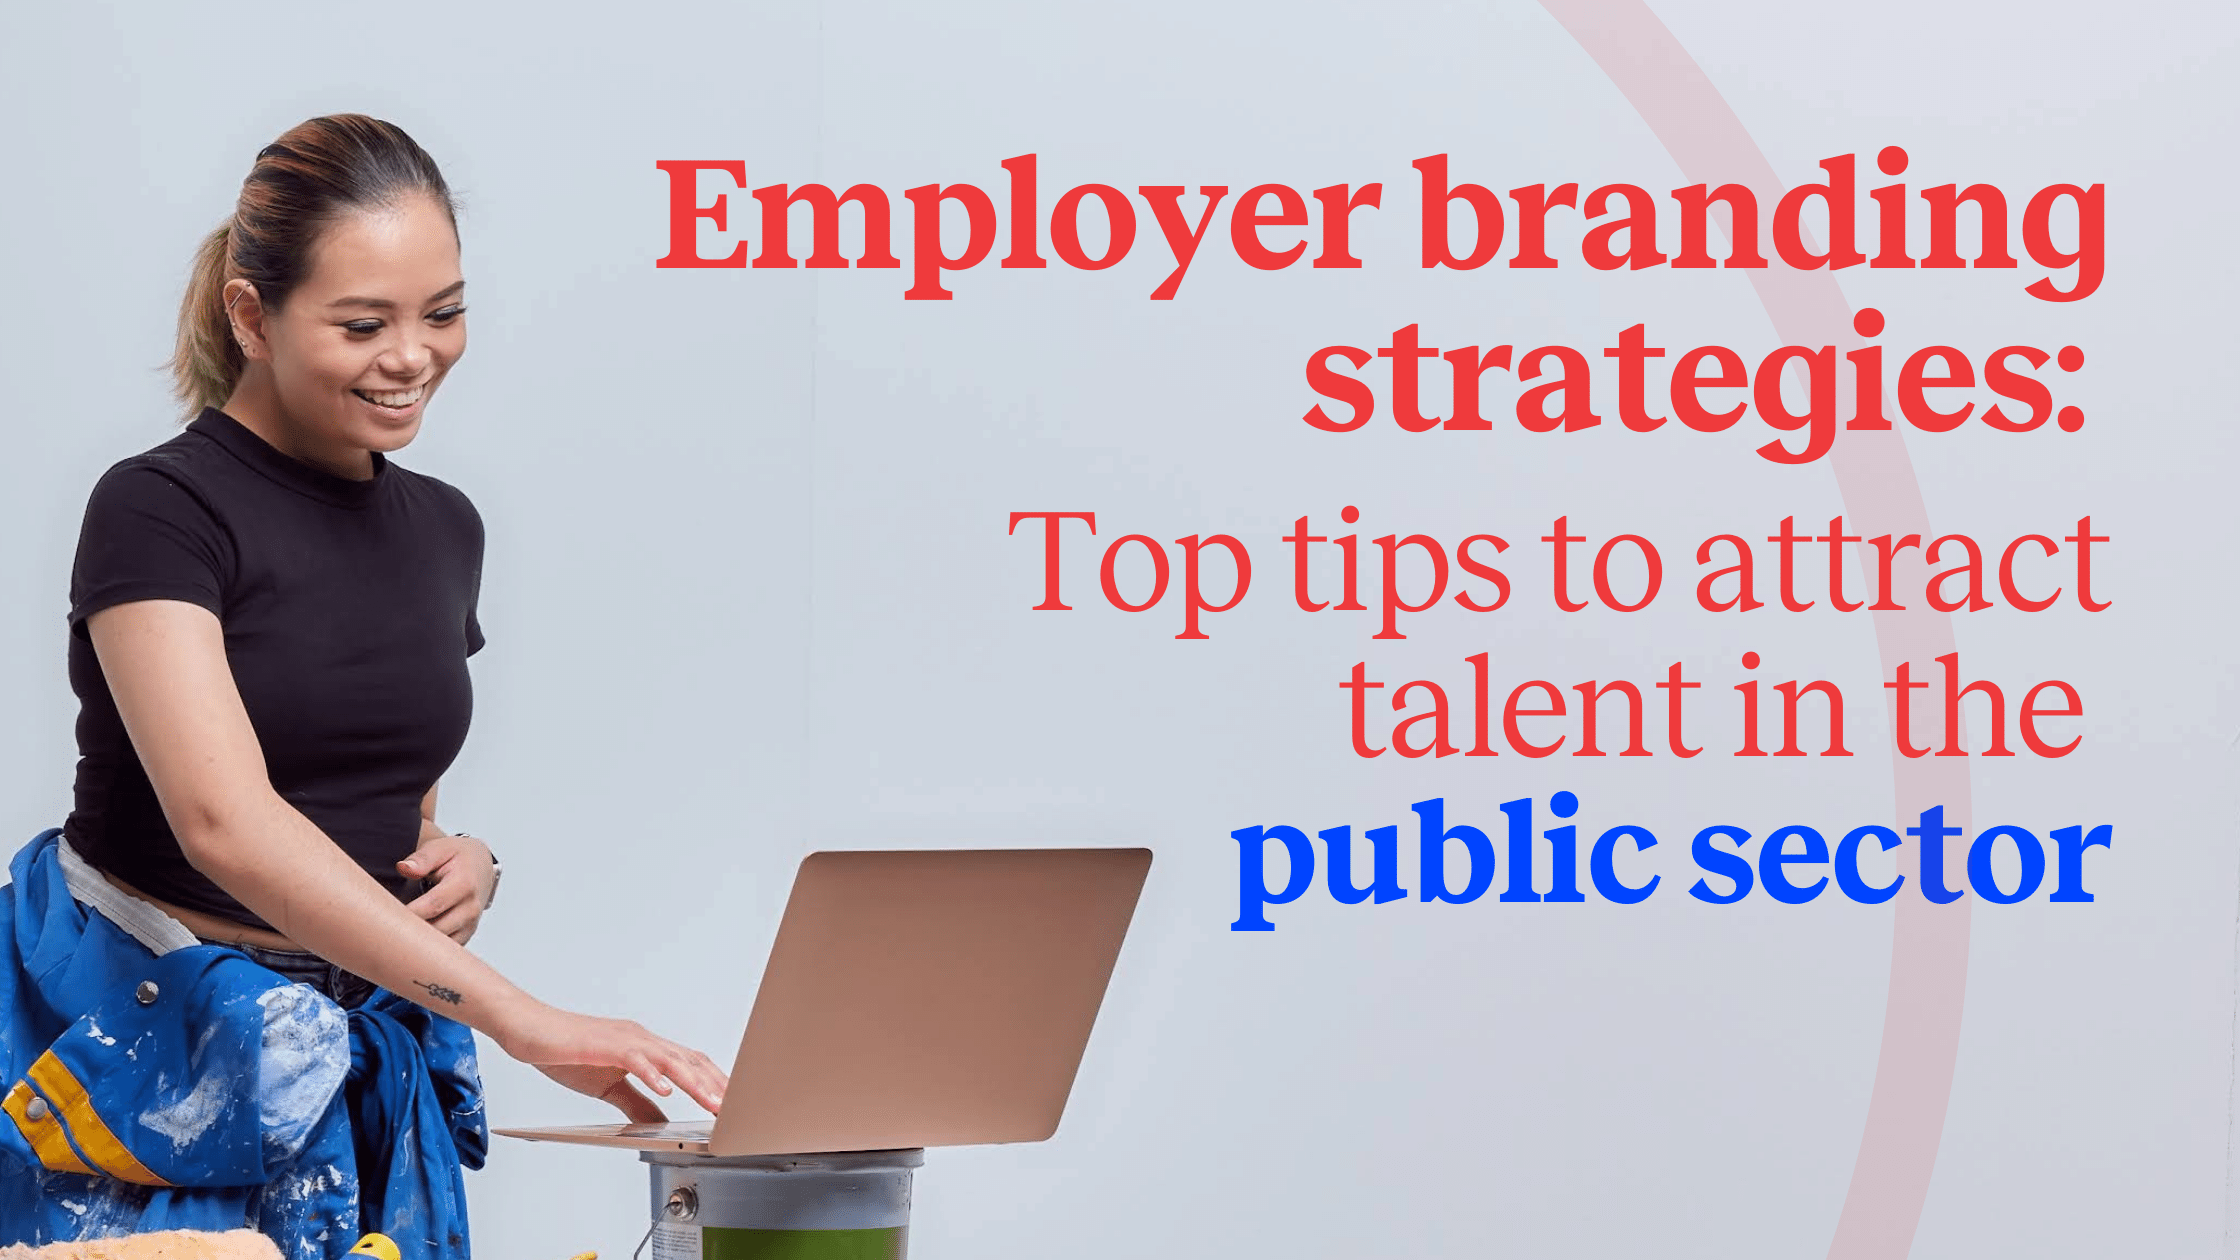 Employer branding strategies: Top tips to attract talent in the public sector